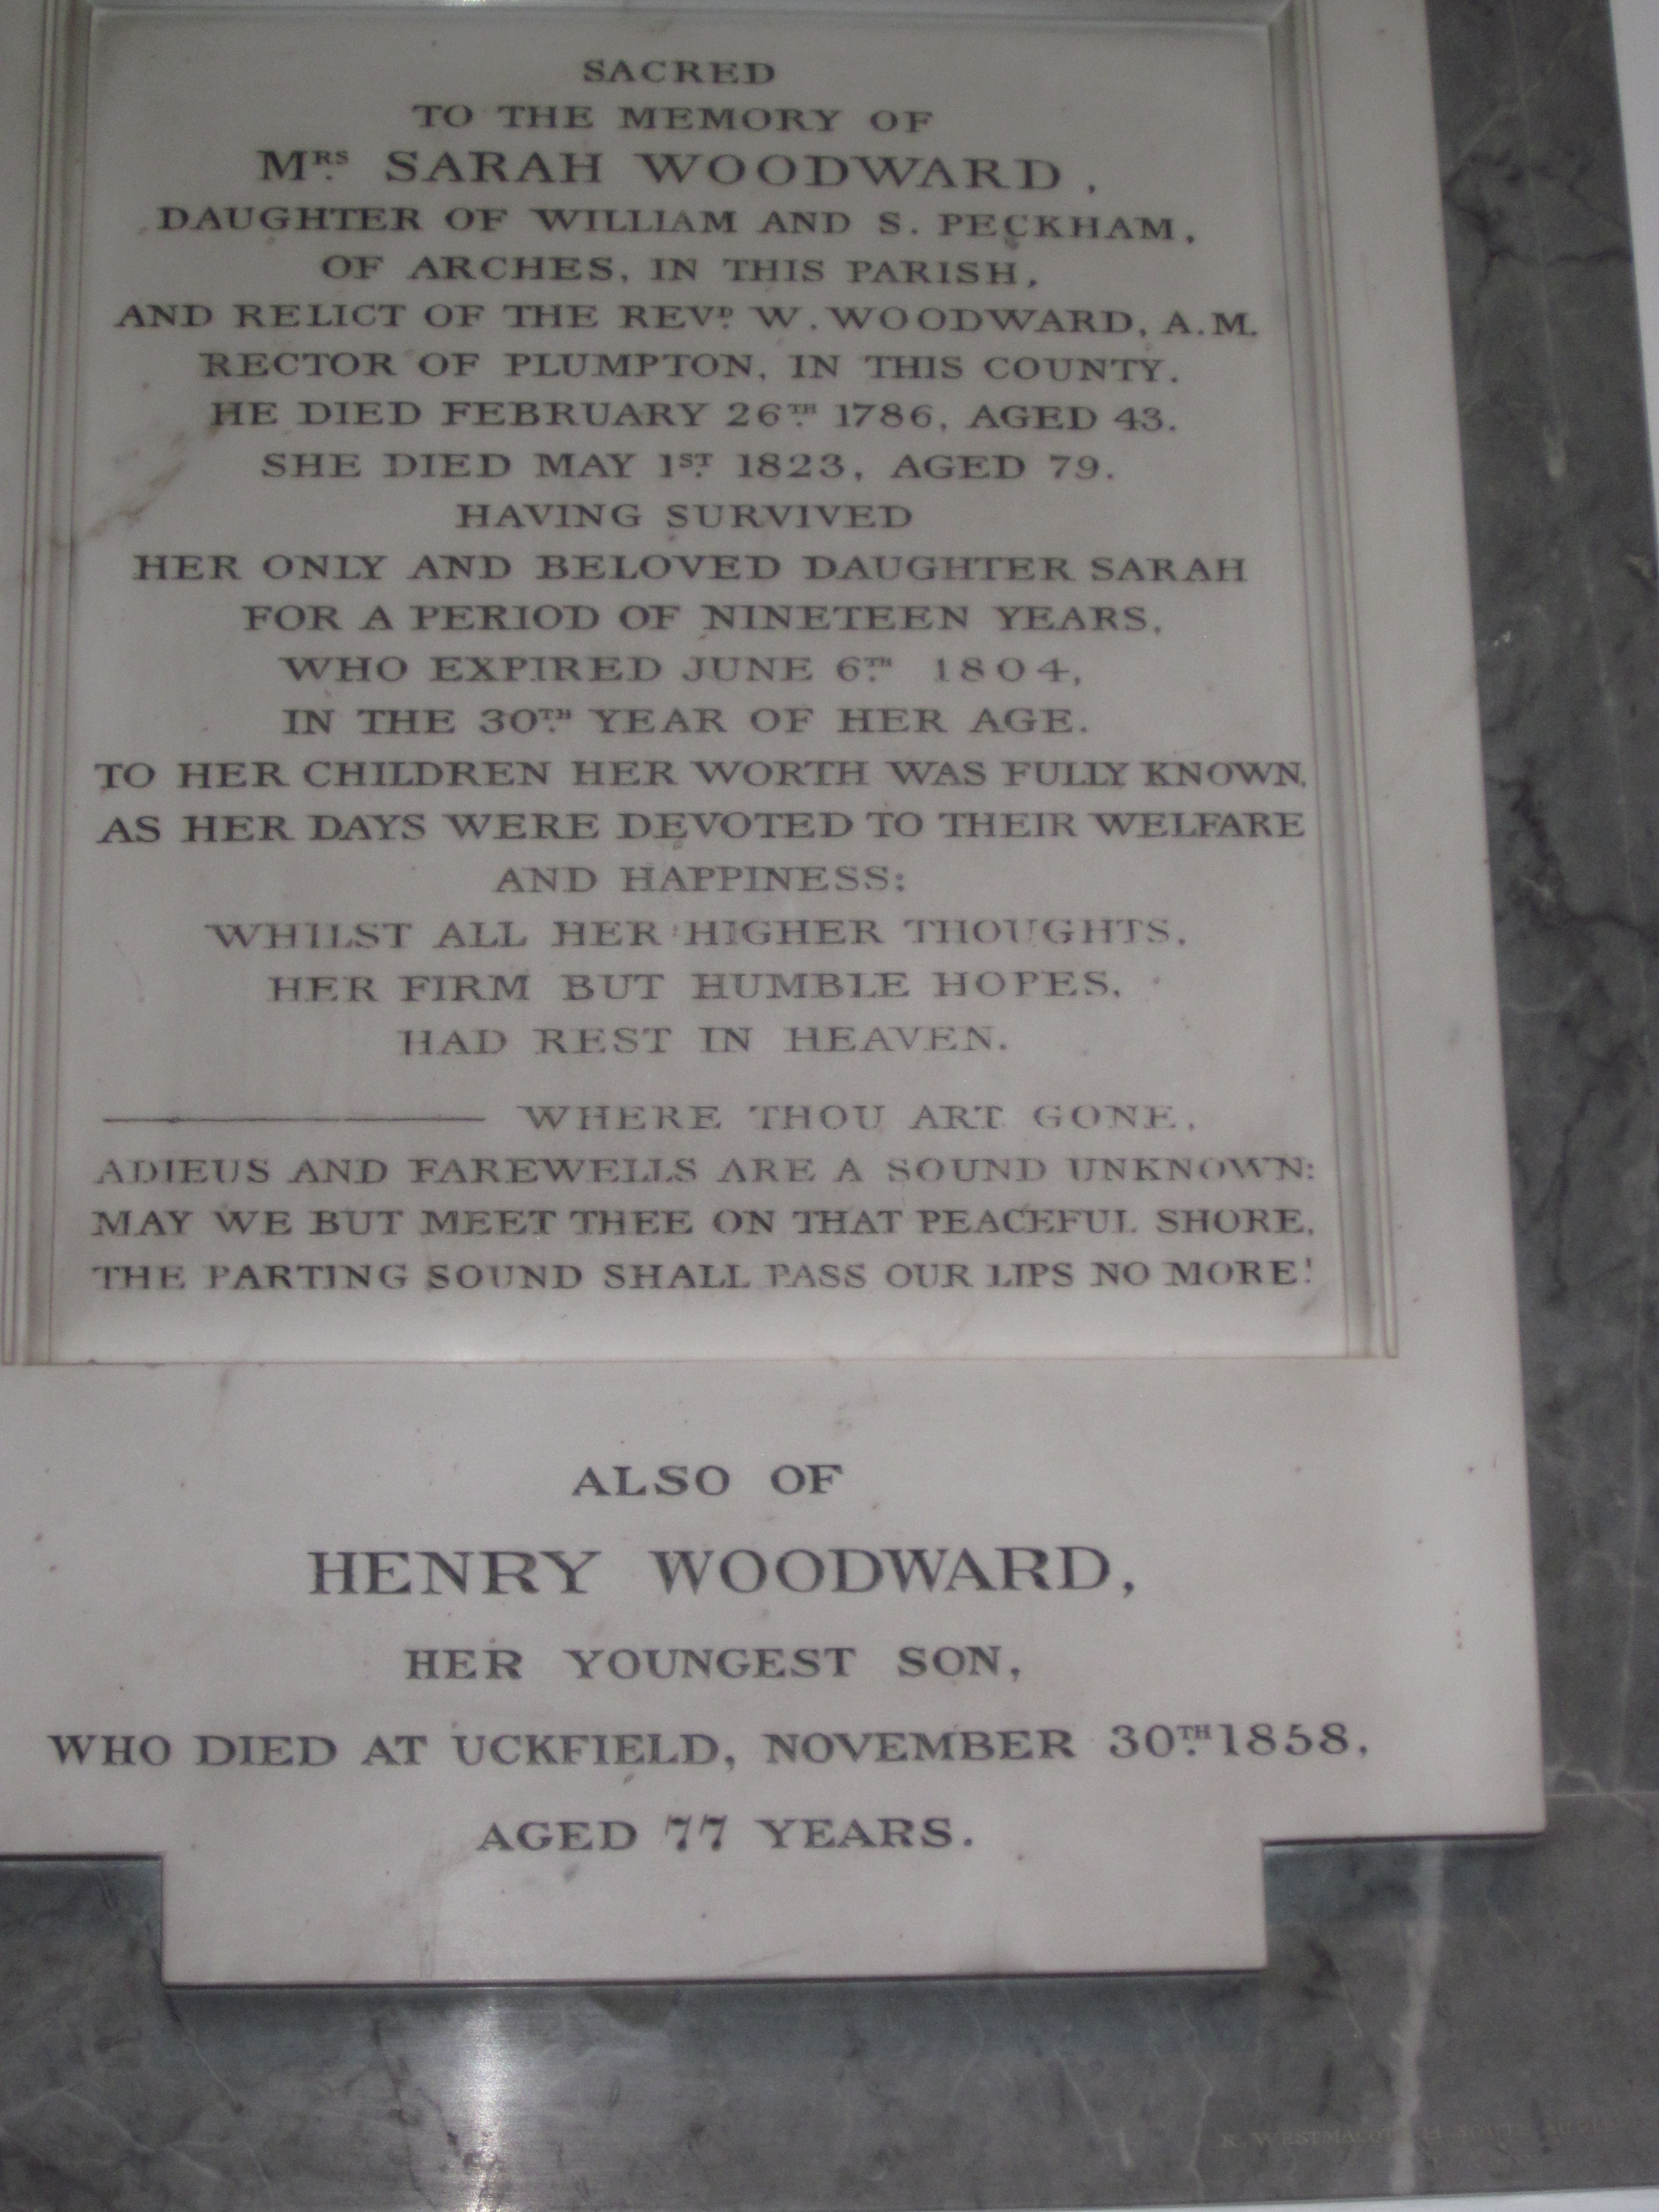 Sacred to the memory of Mrs Sarah Woodward, daughter of William and S Peckham, of Arches in this Parish and relict of the Revd W Woodward AM, Rector of the Parish of Plumpton in this County. He died February 26th 1786, aged 43. She died May 1st 1823, aged 79, having survived her only and beloved daughter Sarah for a period of nineteen years, who expired on 6th June 1804, in the 30th Year of her age. To her children her worth was fully known as her days were devoted to their welfare and happiness, whilst all her higher thoughts, her firm but humble hopes had rest in Heaven. Where thou art gone, adieus and farewells are a sound unknown: May we but meet thee on that peaceful shore. The parting sound shall pass our lips no more!